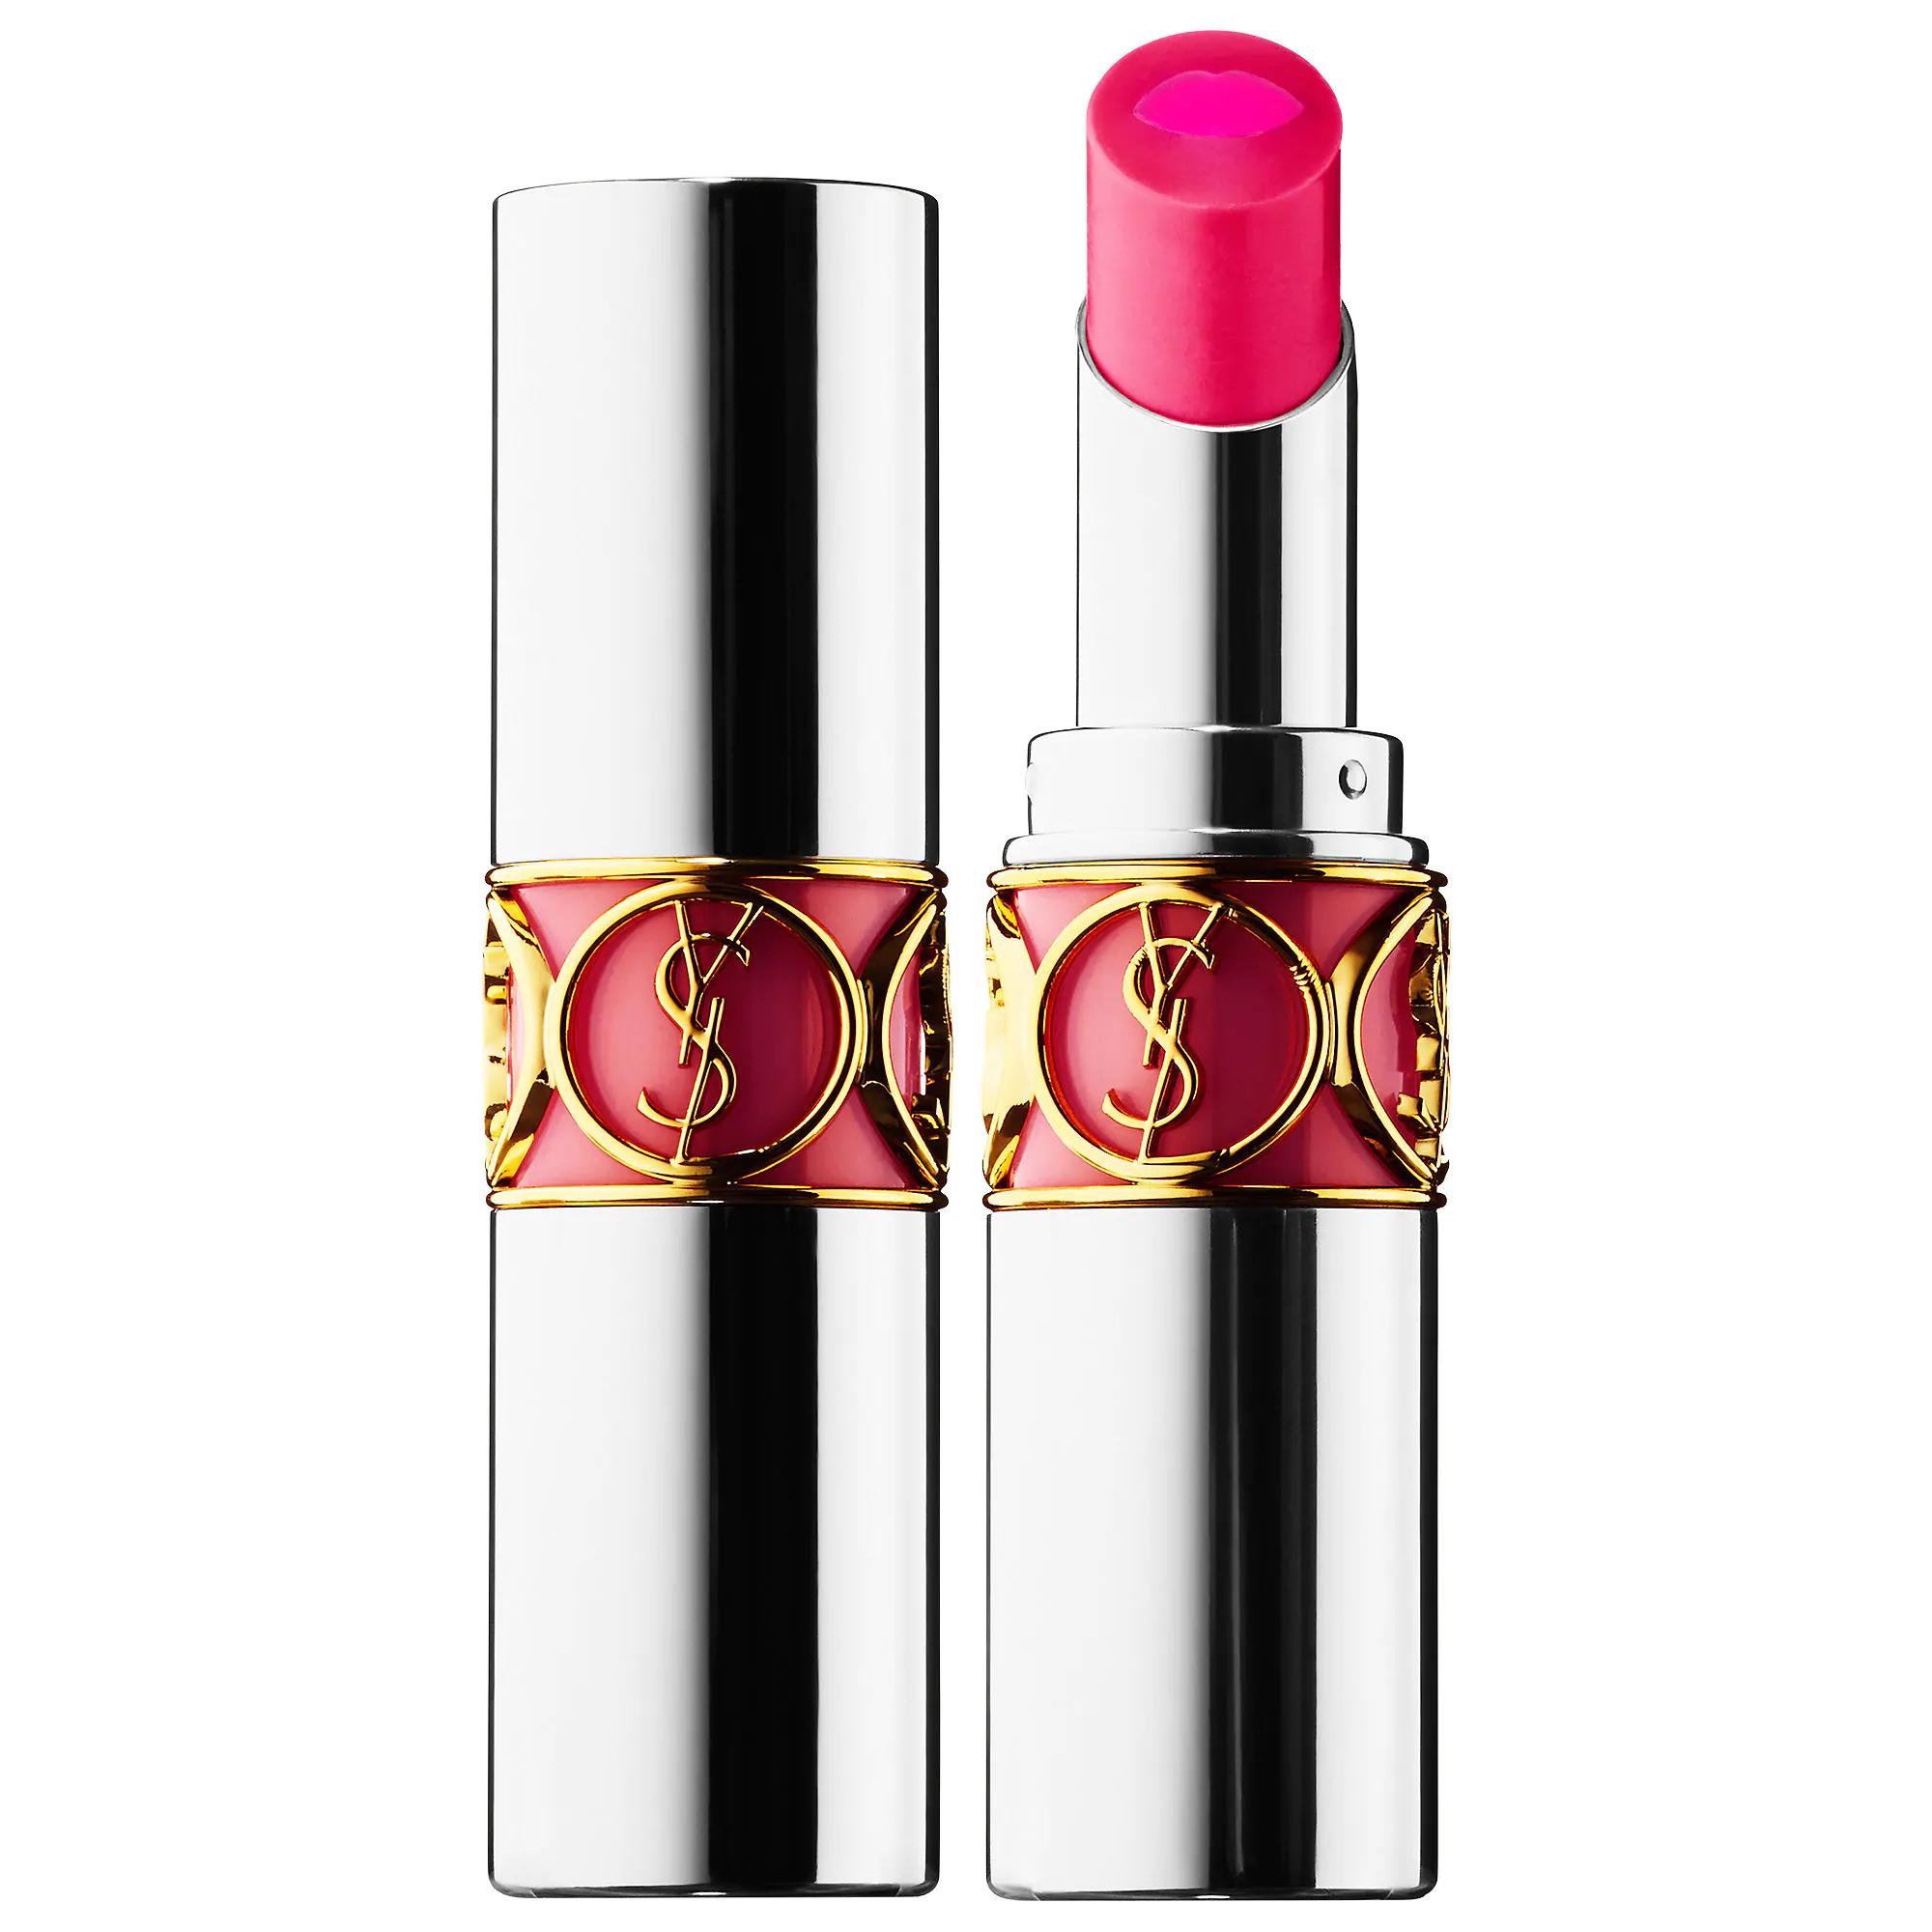 YSL Volupte Tint-In-Balm Try Me Berry 12